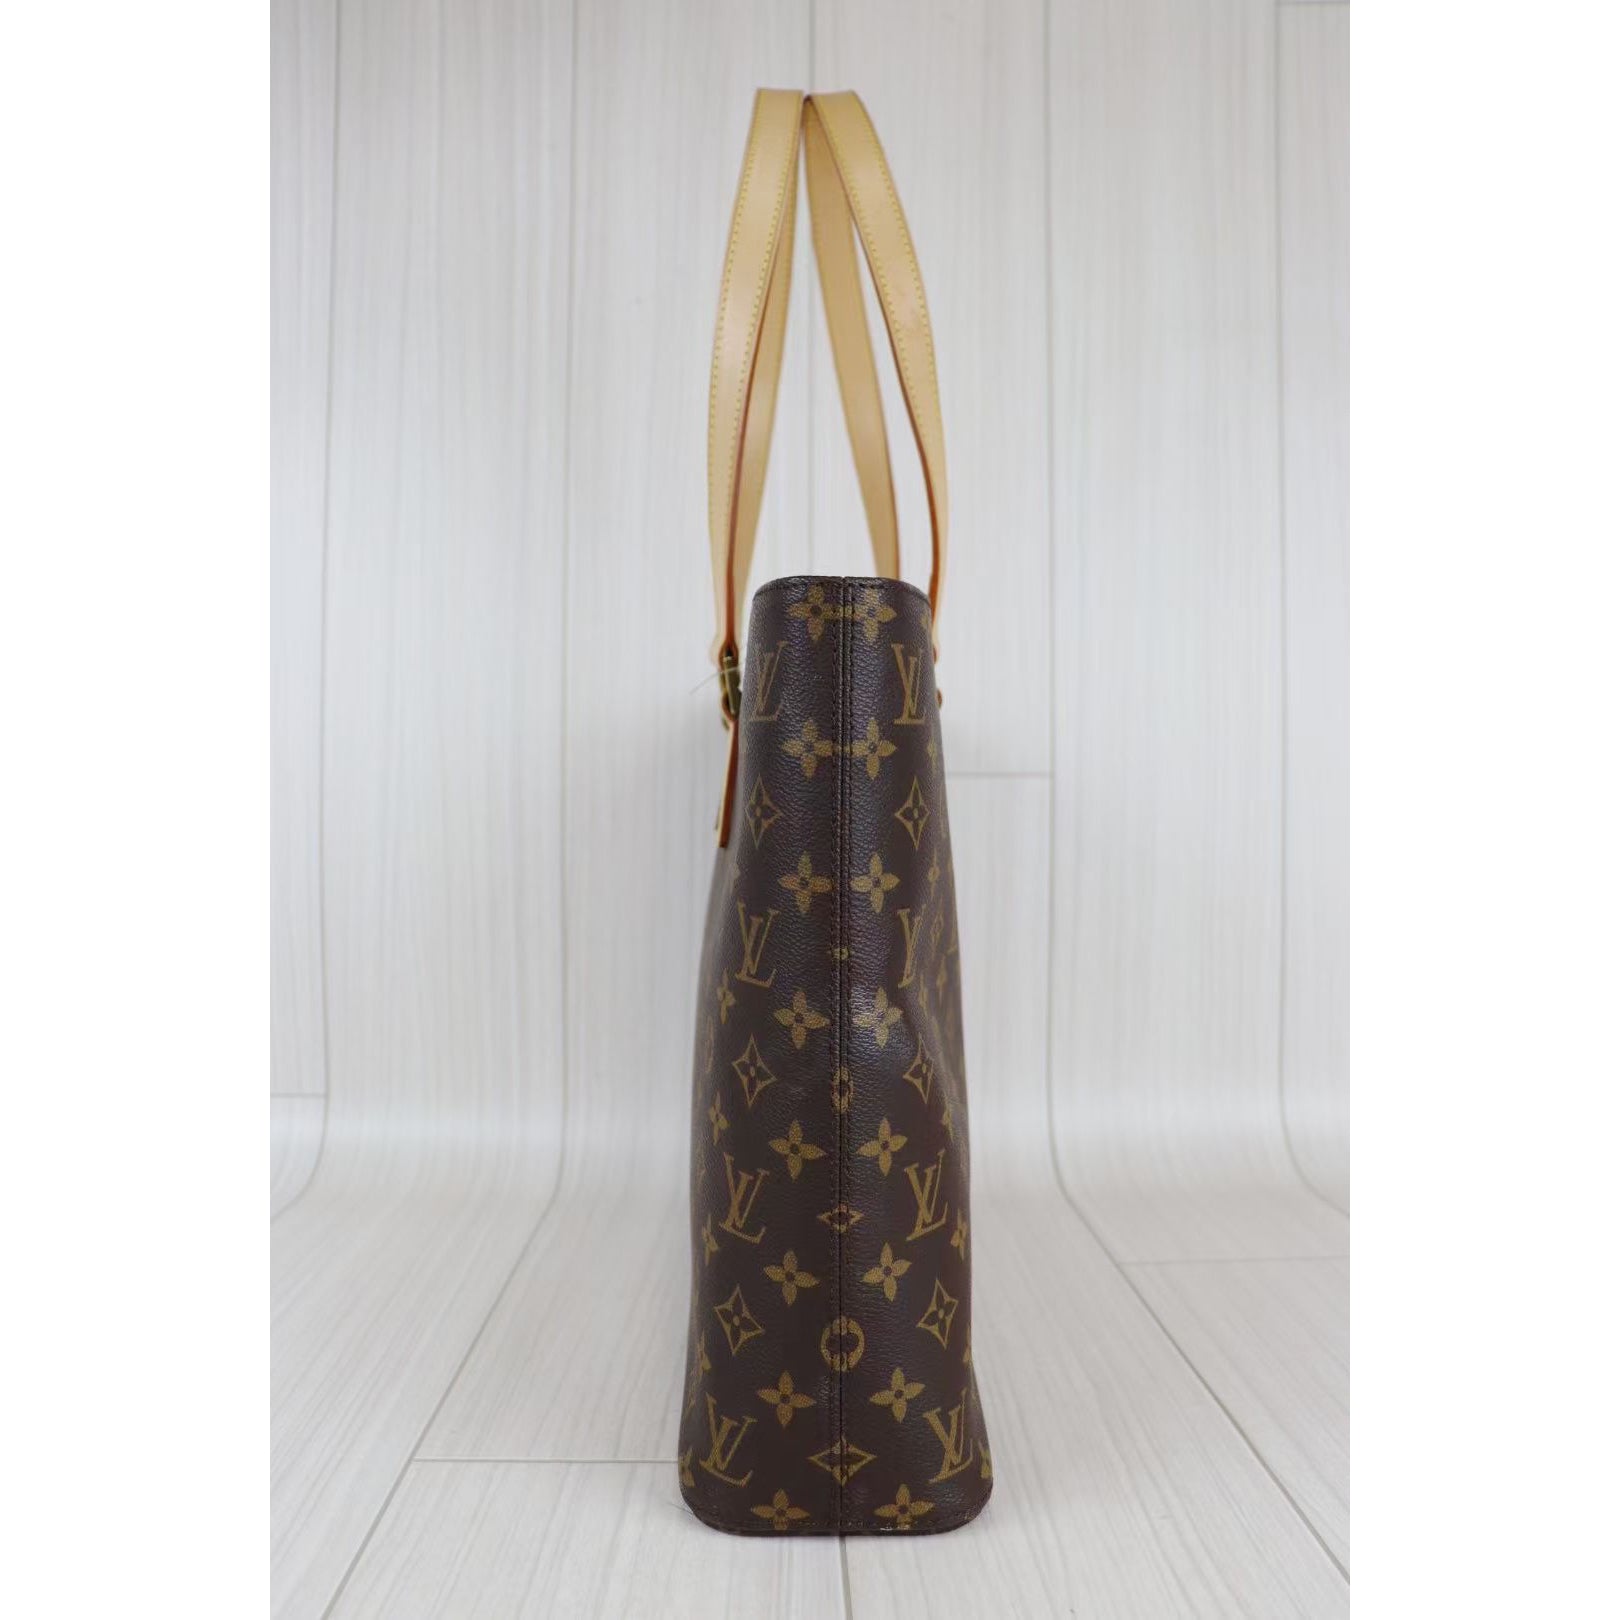 Princesspauonlineshoppe Main Page - ❗💎Authentic Louis Vuitton Luco Tote Bag💎❗  How to Order? Price are in the 📷 Please send us message/DMwith the  screenshot/copy/name of the item you want to purchase. Invoice